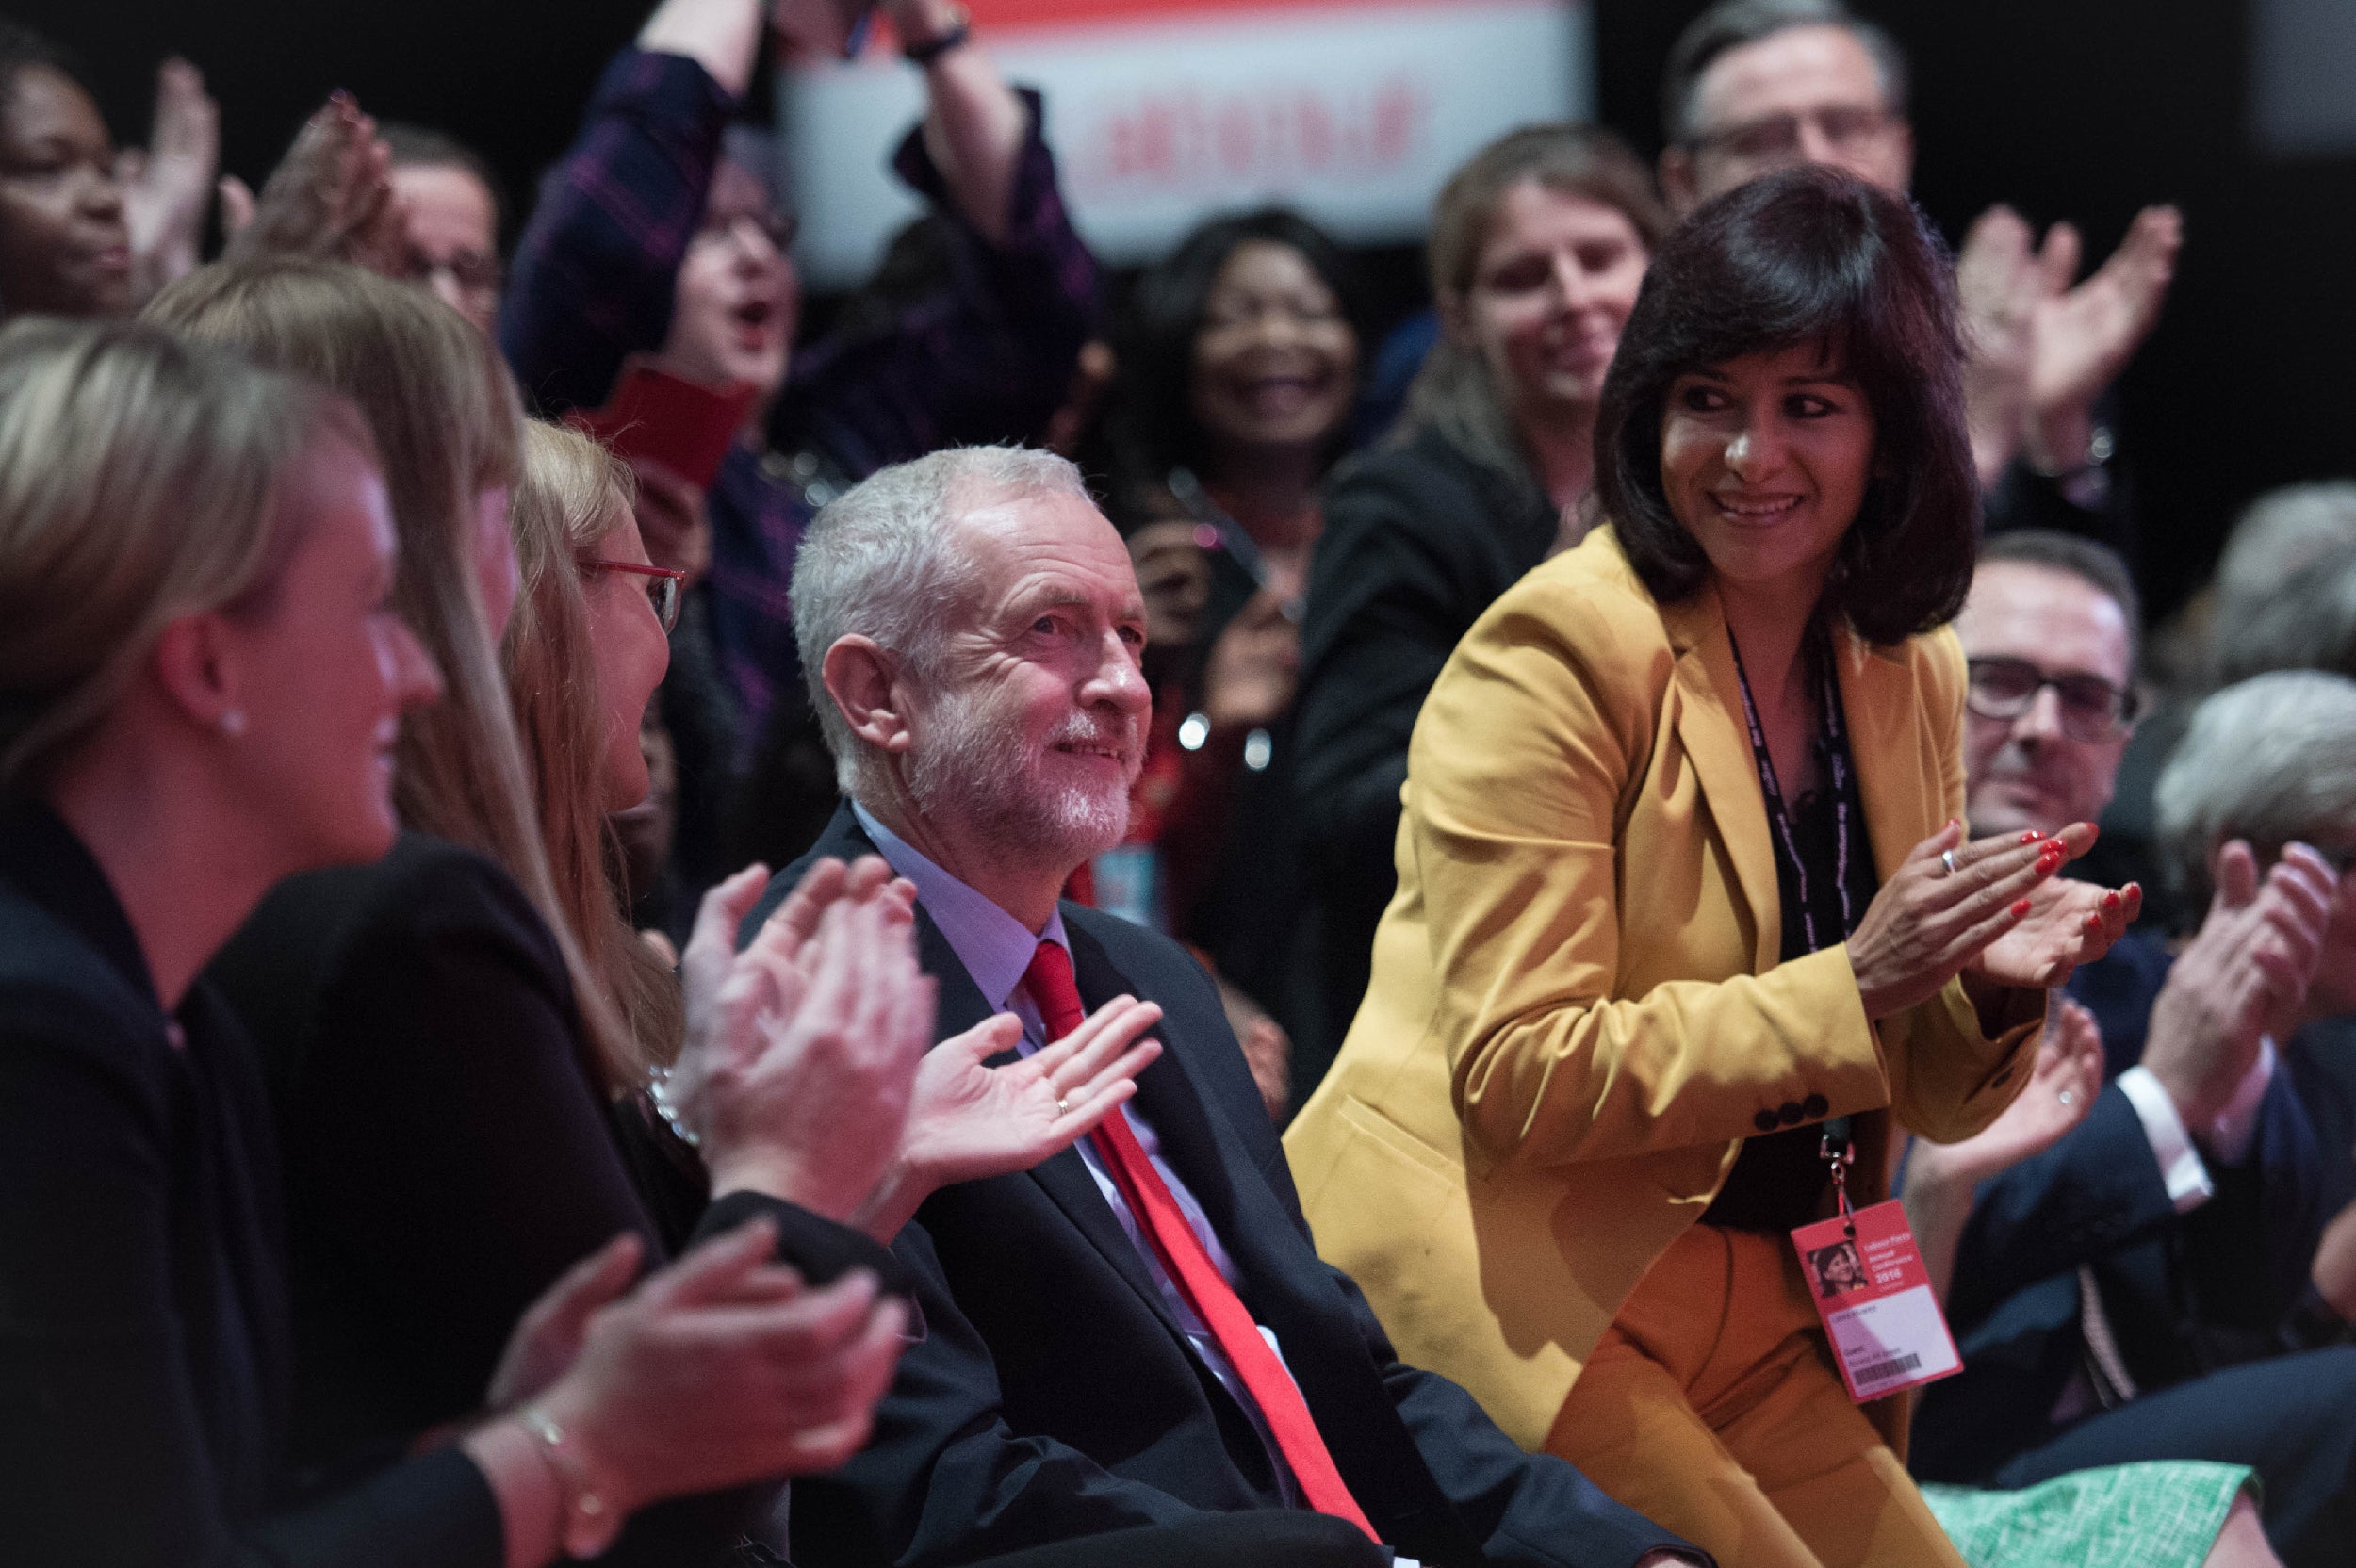 Jeremy Corbyn’s allies applaud him as he is re-elected leader but divisions remain